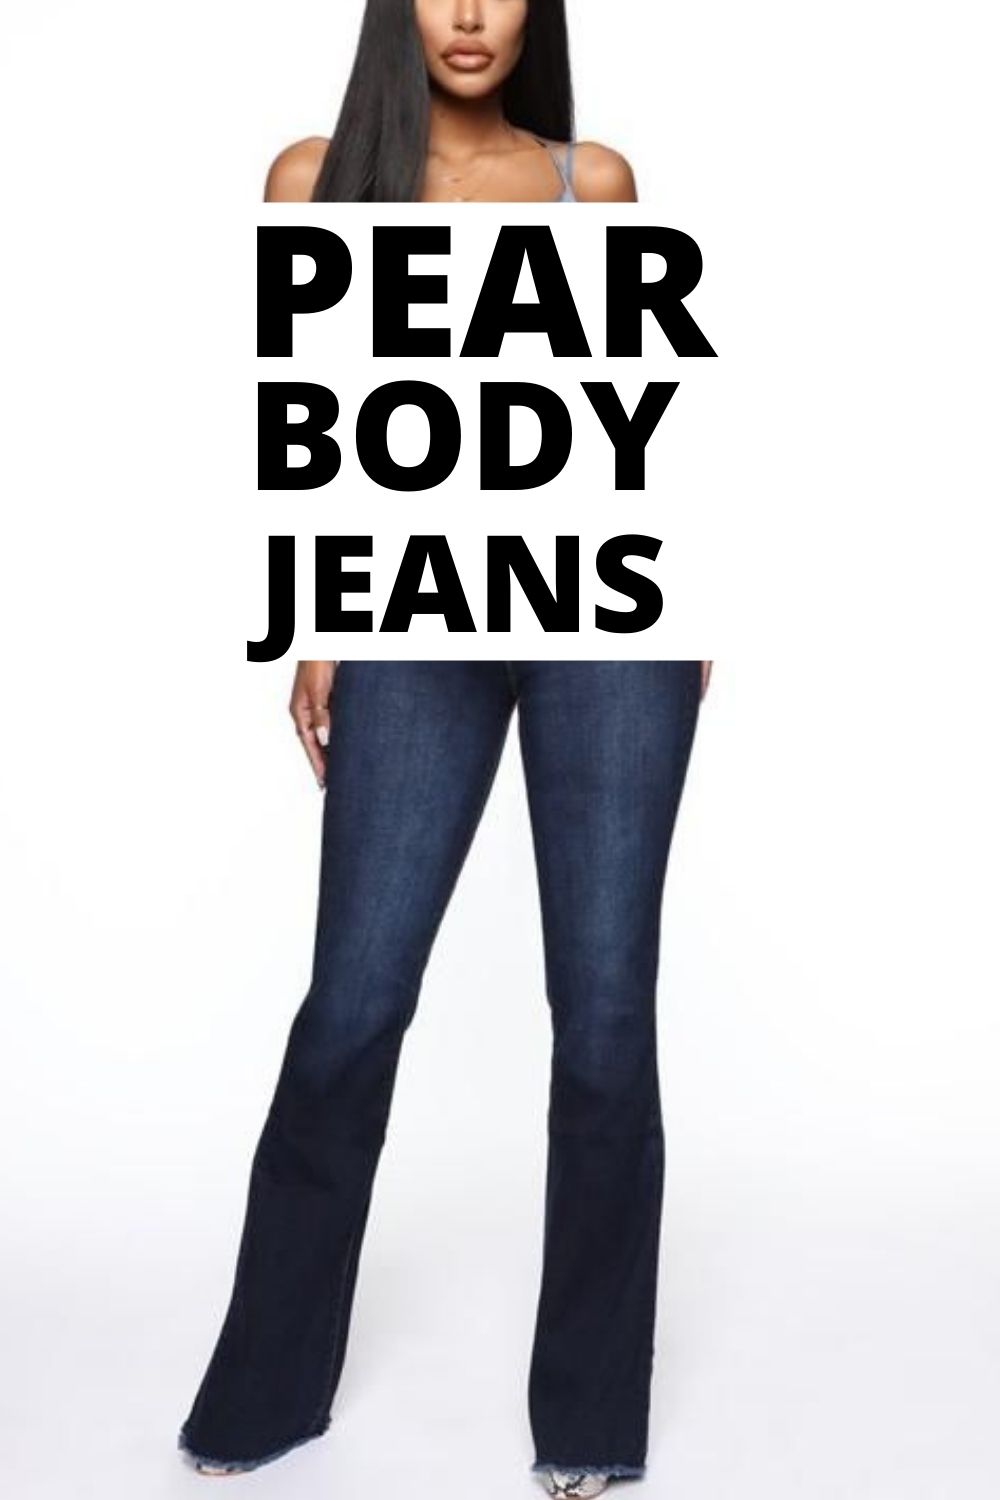 20 Best Jeans For A Pear Shape Or ALine Body Filosofashion